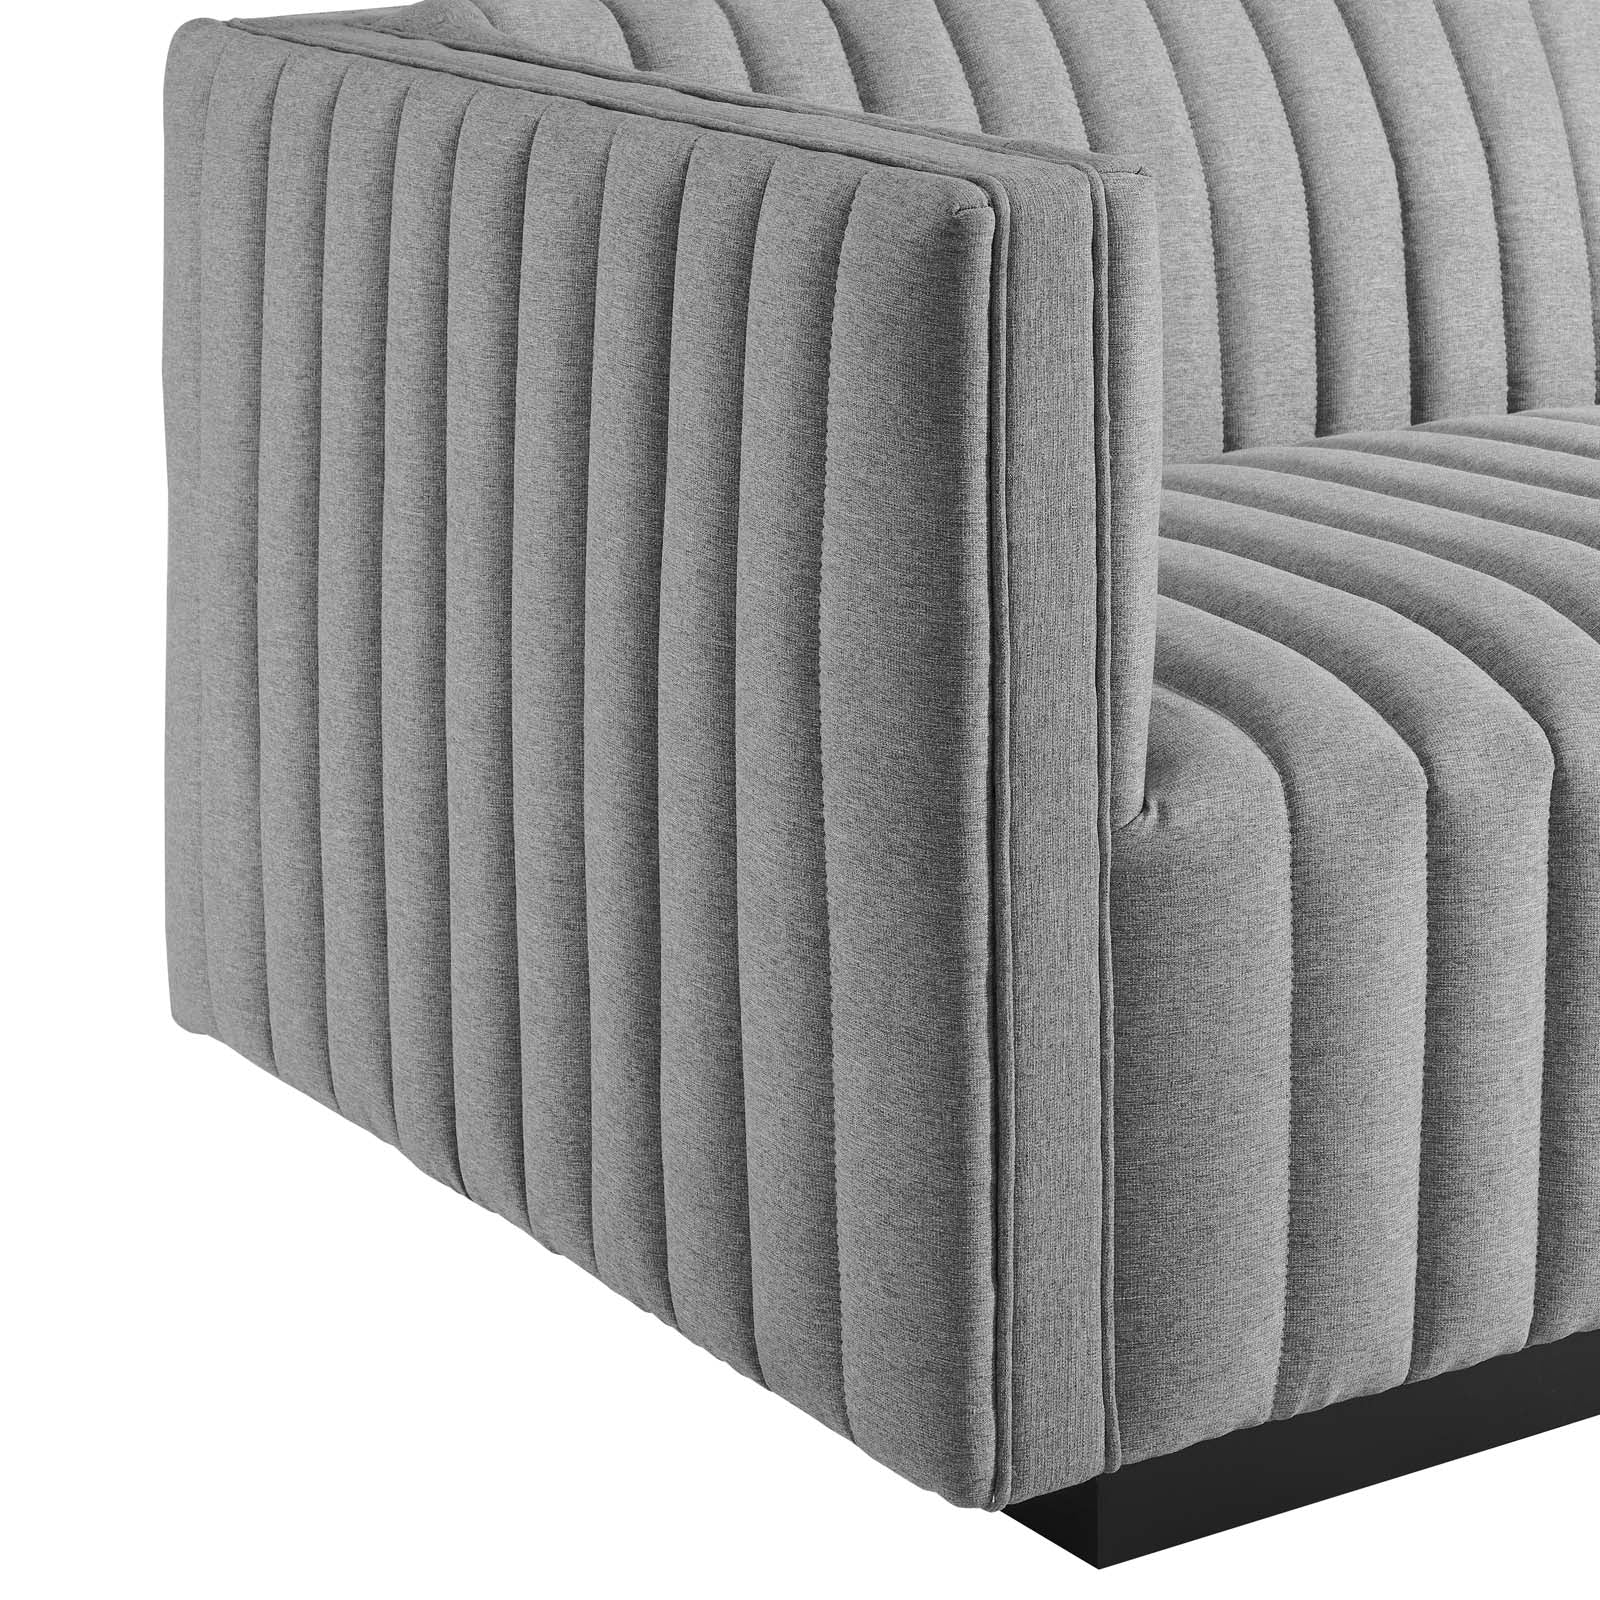 Conjure Channel Tufted Upholstered Fabric 5-Piece L-Shaped Sectional - East Shore Modern Home Furnishings